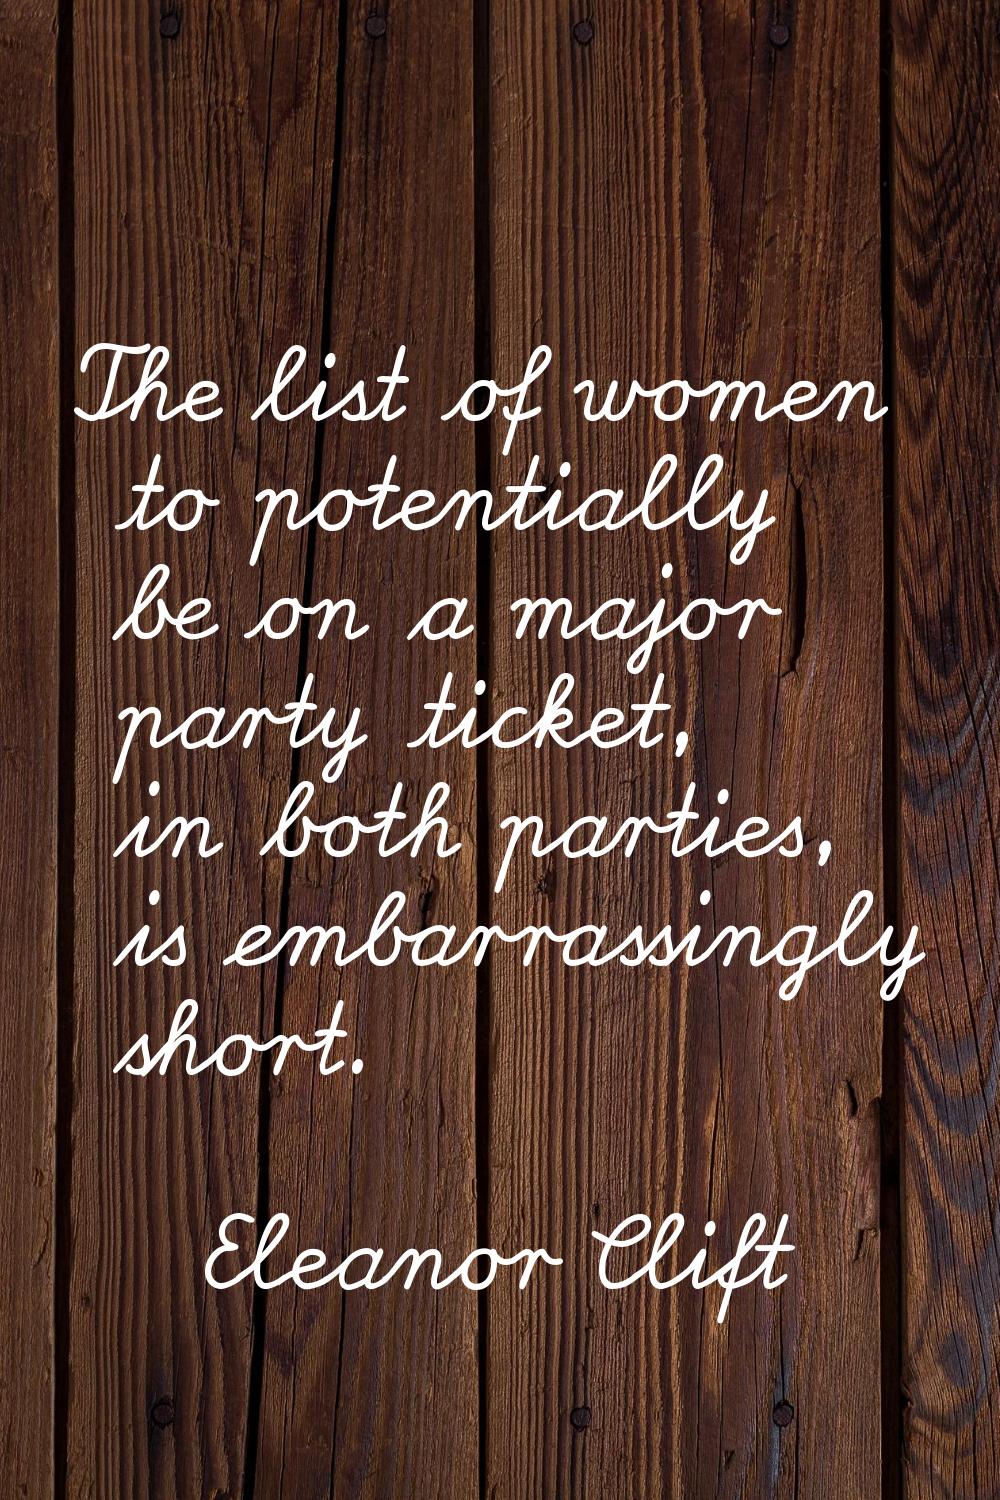 The list of women to potentially be on a major party ticket, in both parties, is embarrassingly sho